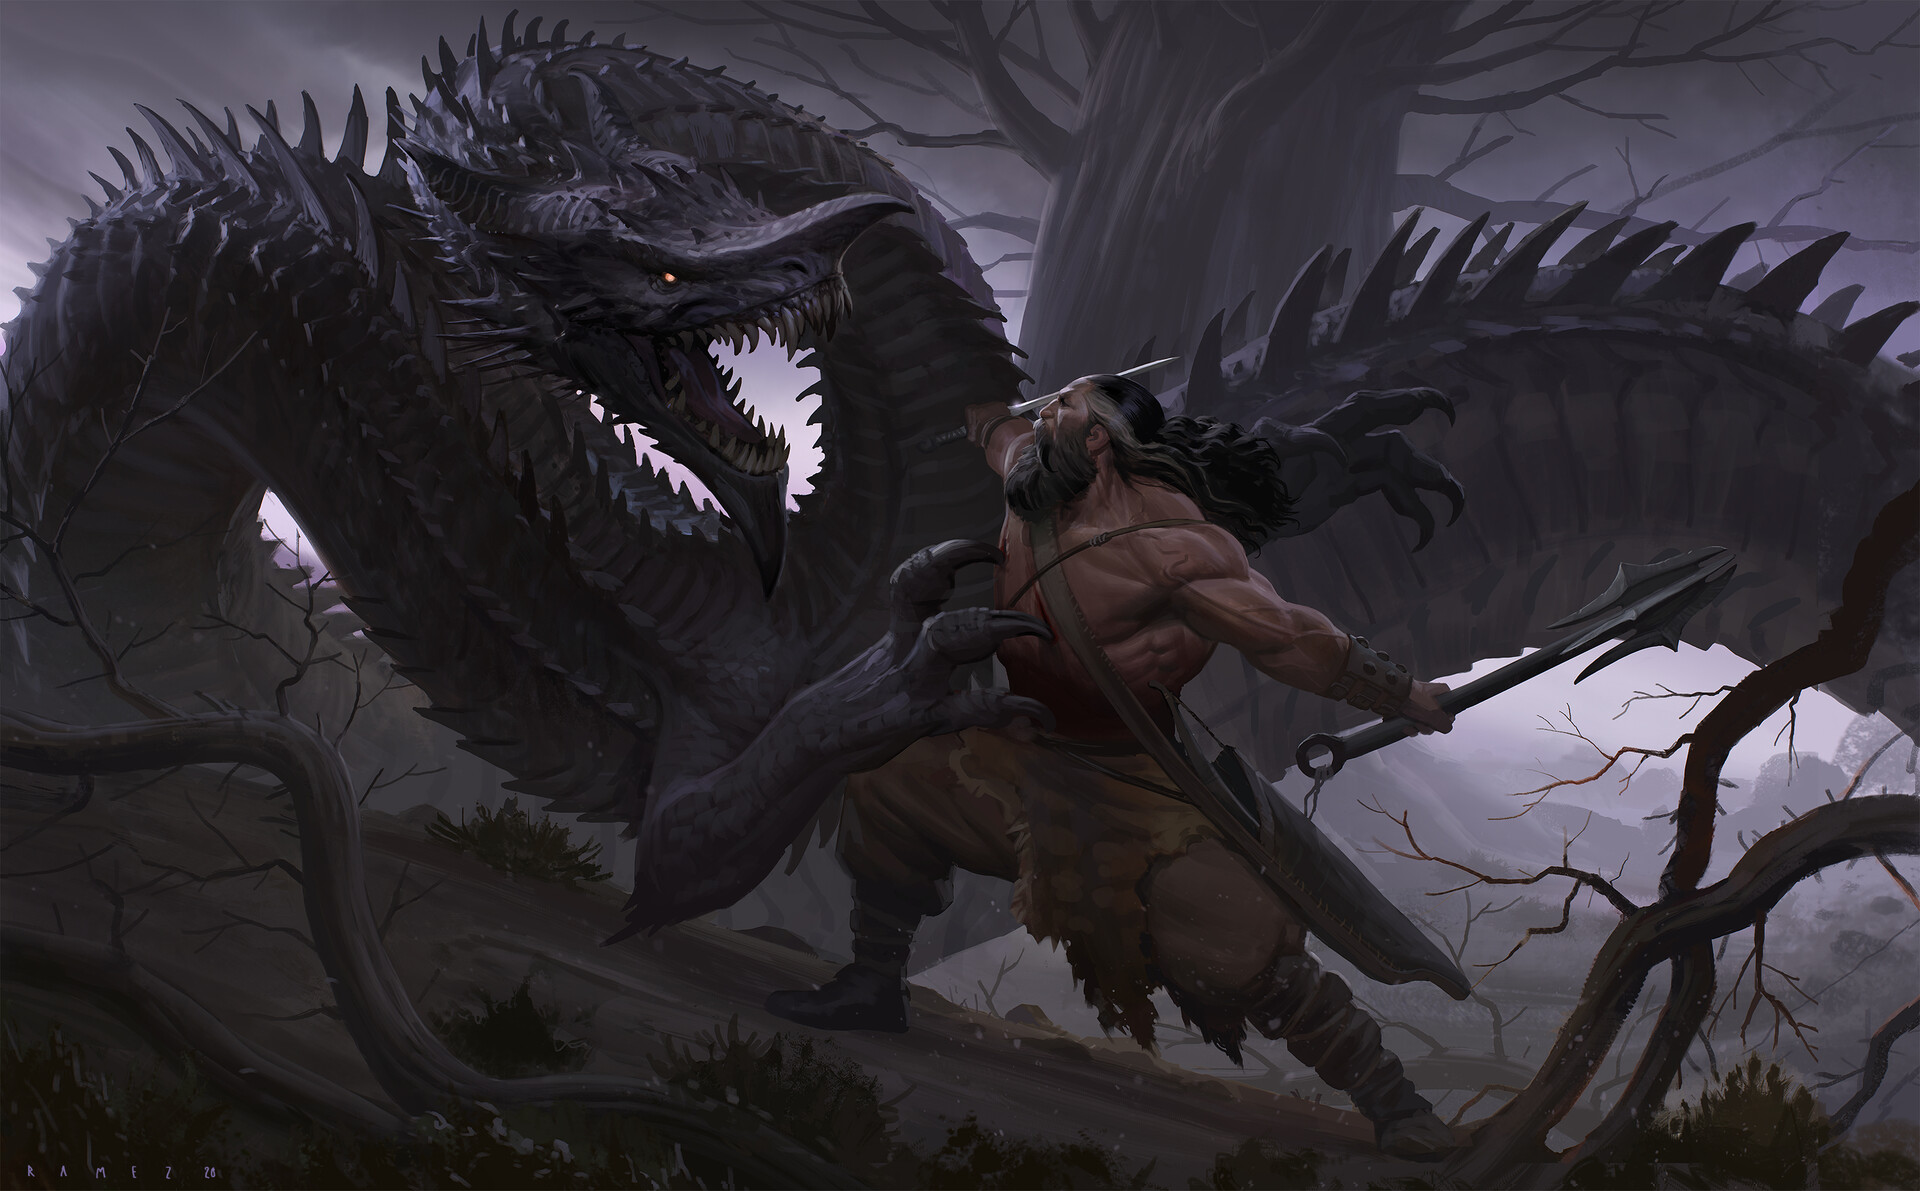 General 1920x1191 artwork dragon creature fantasy art fantasy men Saeed Ramez Chinese dragon digital art pointy teeth weapon muscles shirtless claws glowing eyes sky clouds branch fighting